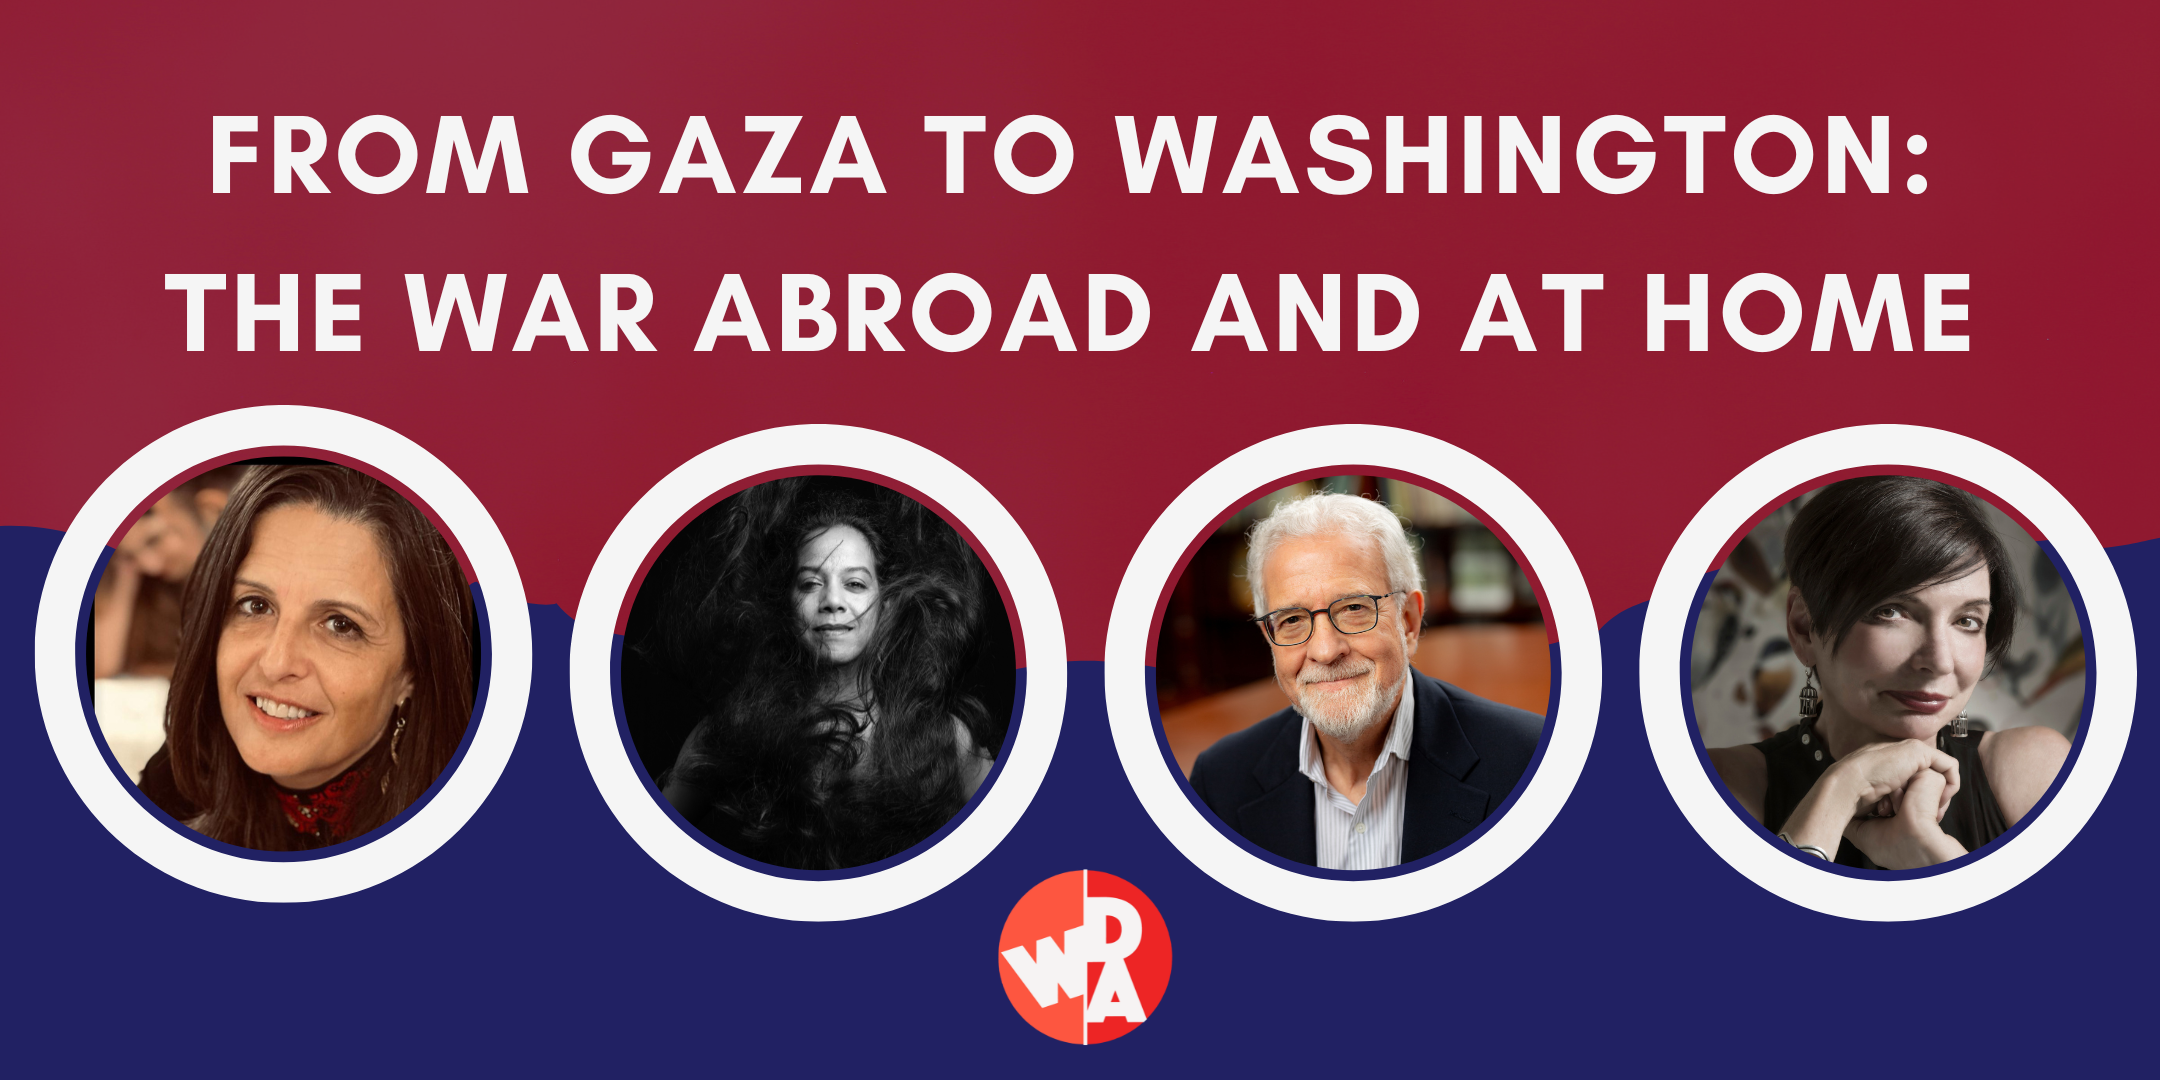 WRITERS FOR DEMOCRATIC ACTION presents "From Gaza to Washington: The War Abroad and at Home" event cover photo